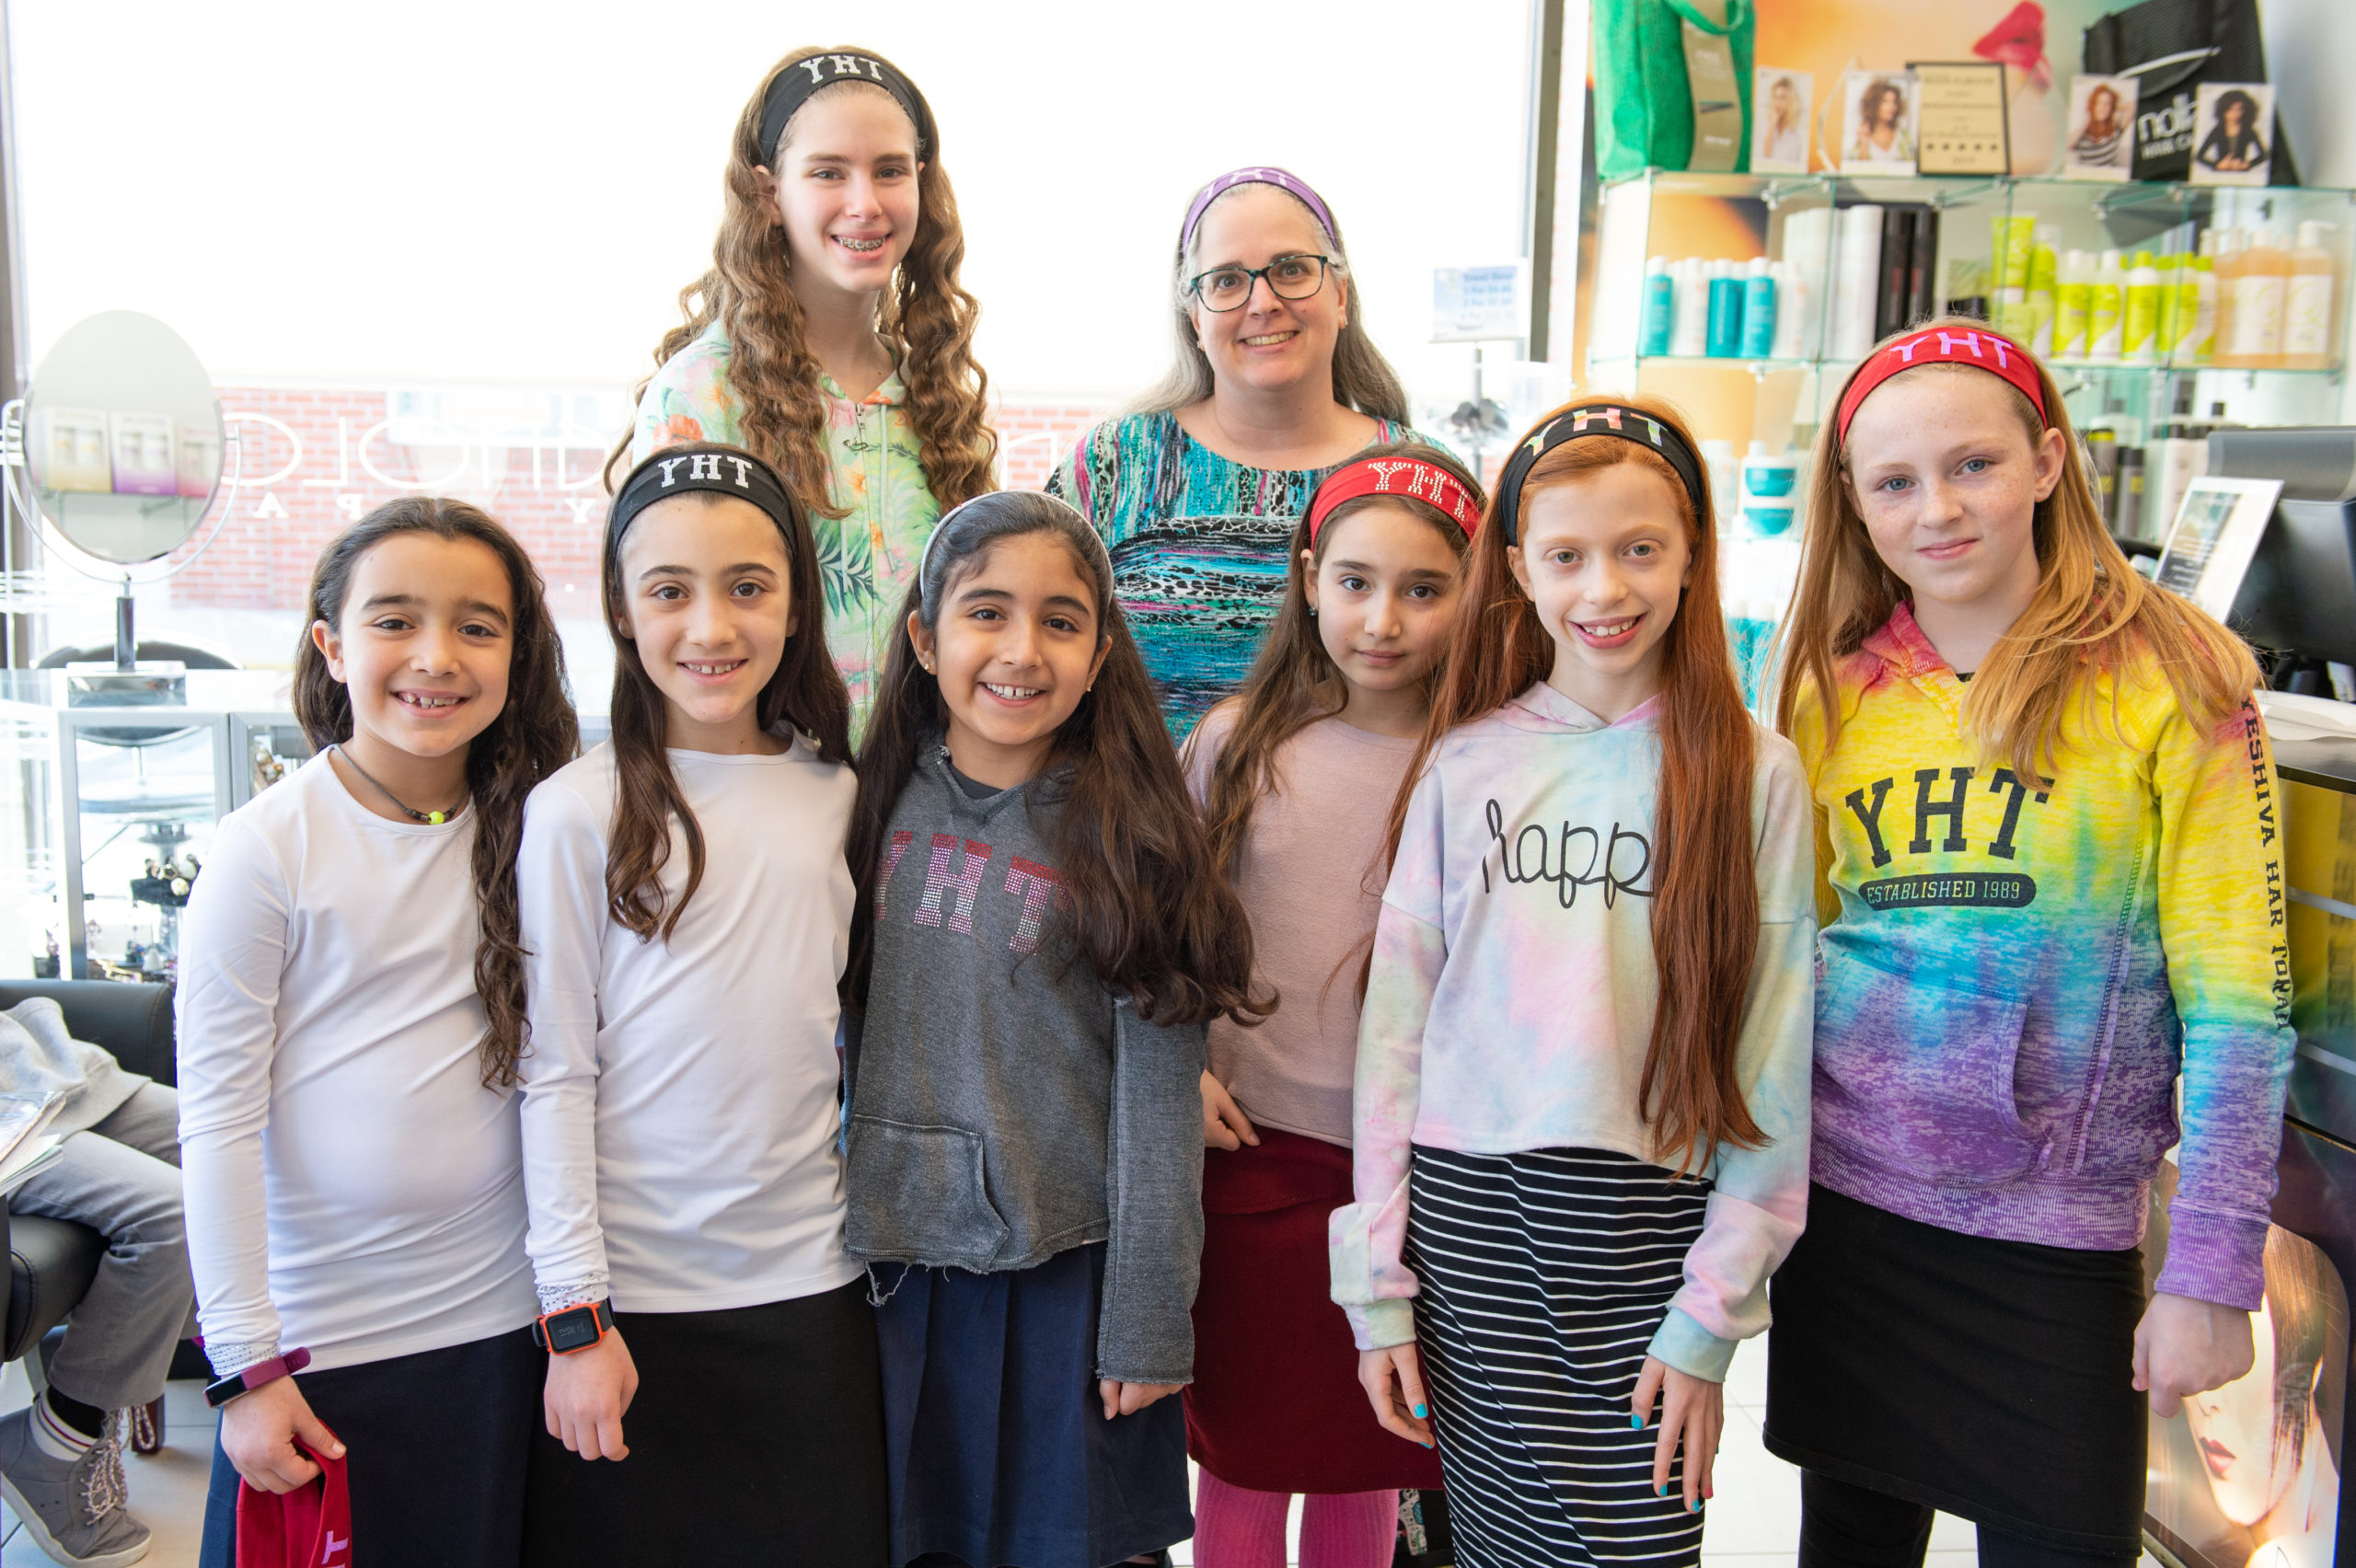 Yeshiva Har Torah held a group hair donation event on Wednesday, with students, staff and parents giving hair to an Israeli charity to make wigs for children with cancer. (Photo by Eli Schilowitz)